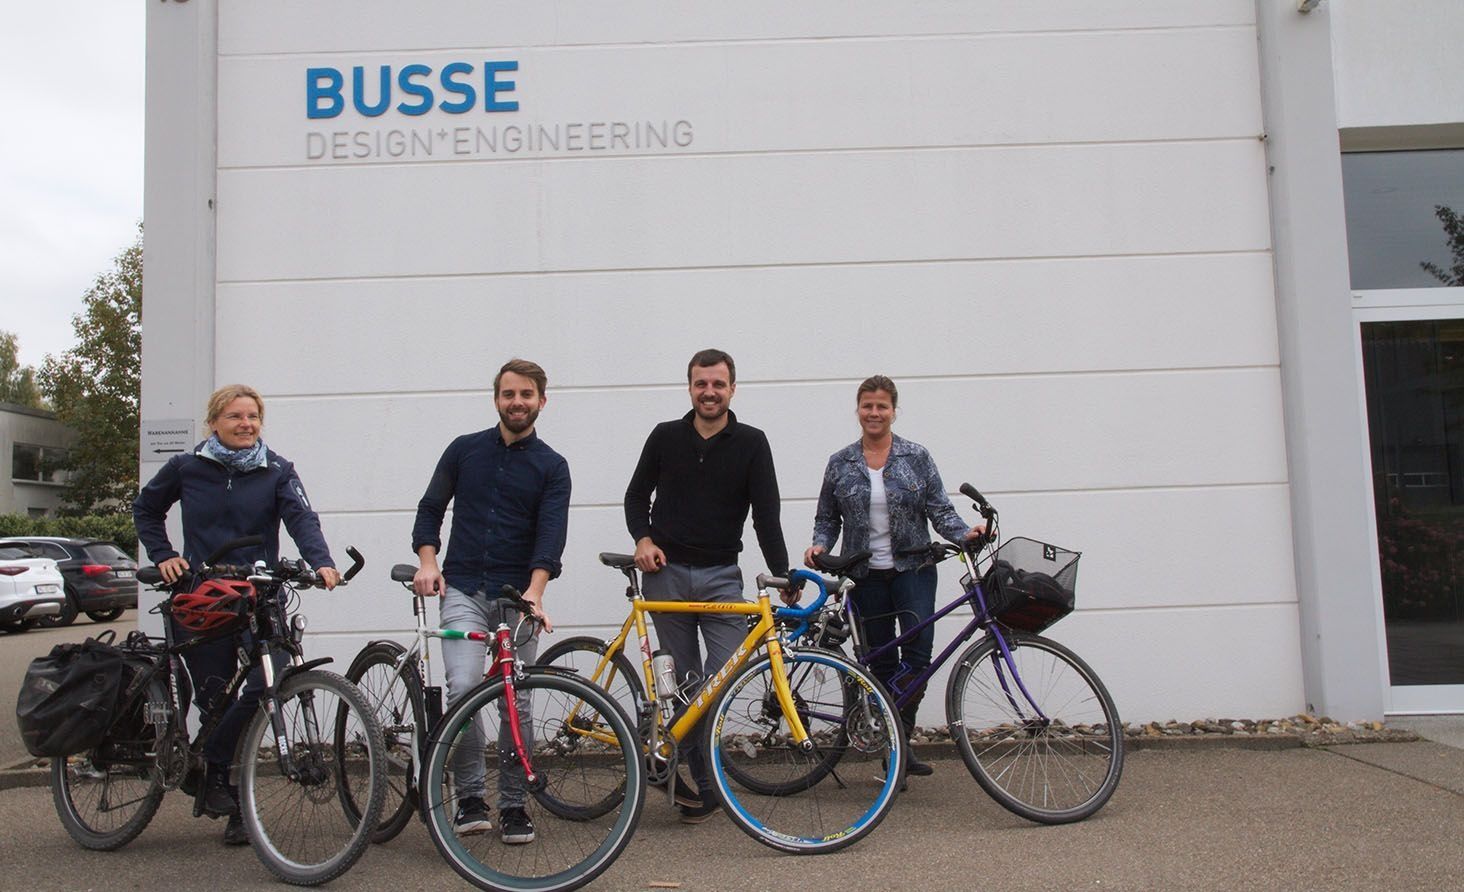 Employees stand in front of the Busse company building next to their bicycles